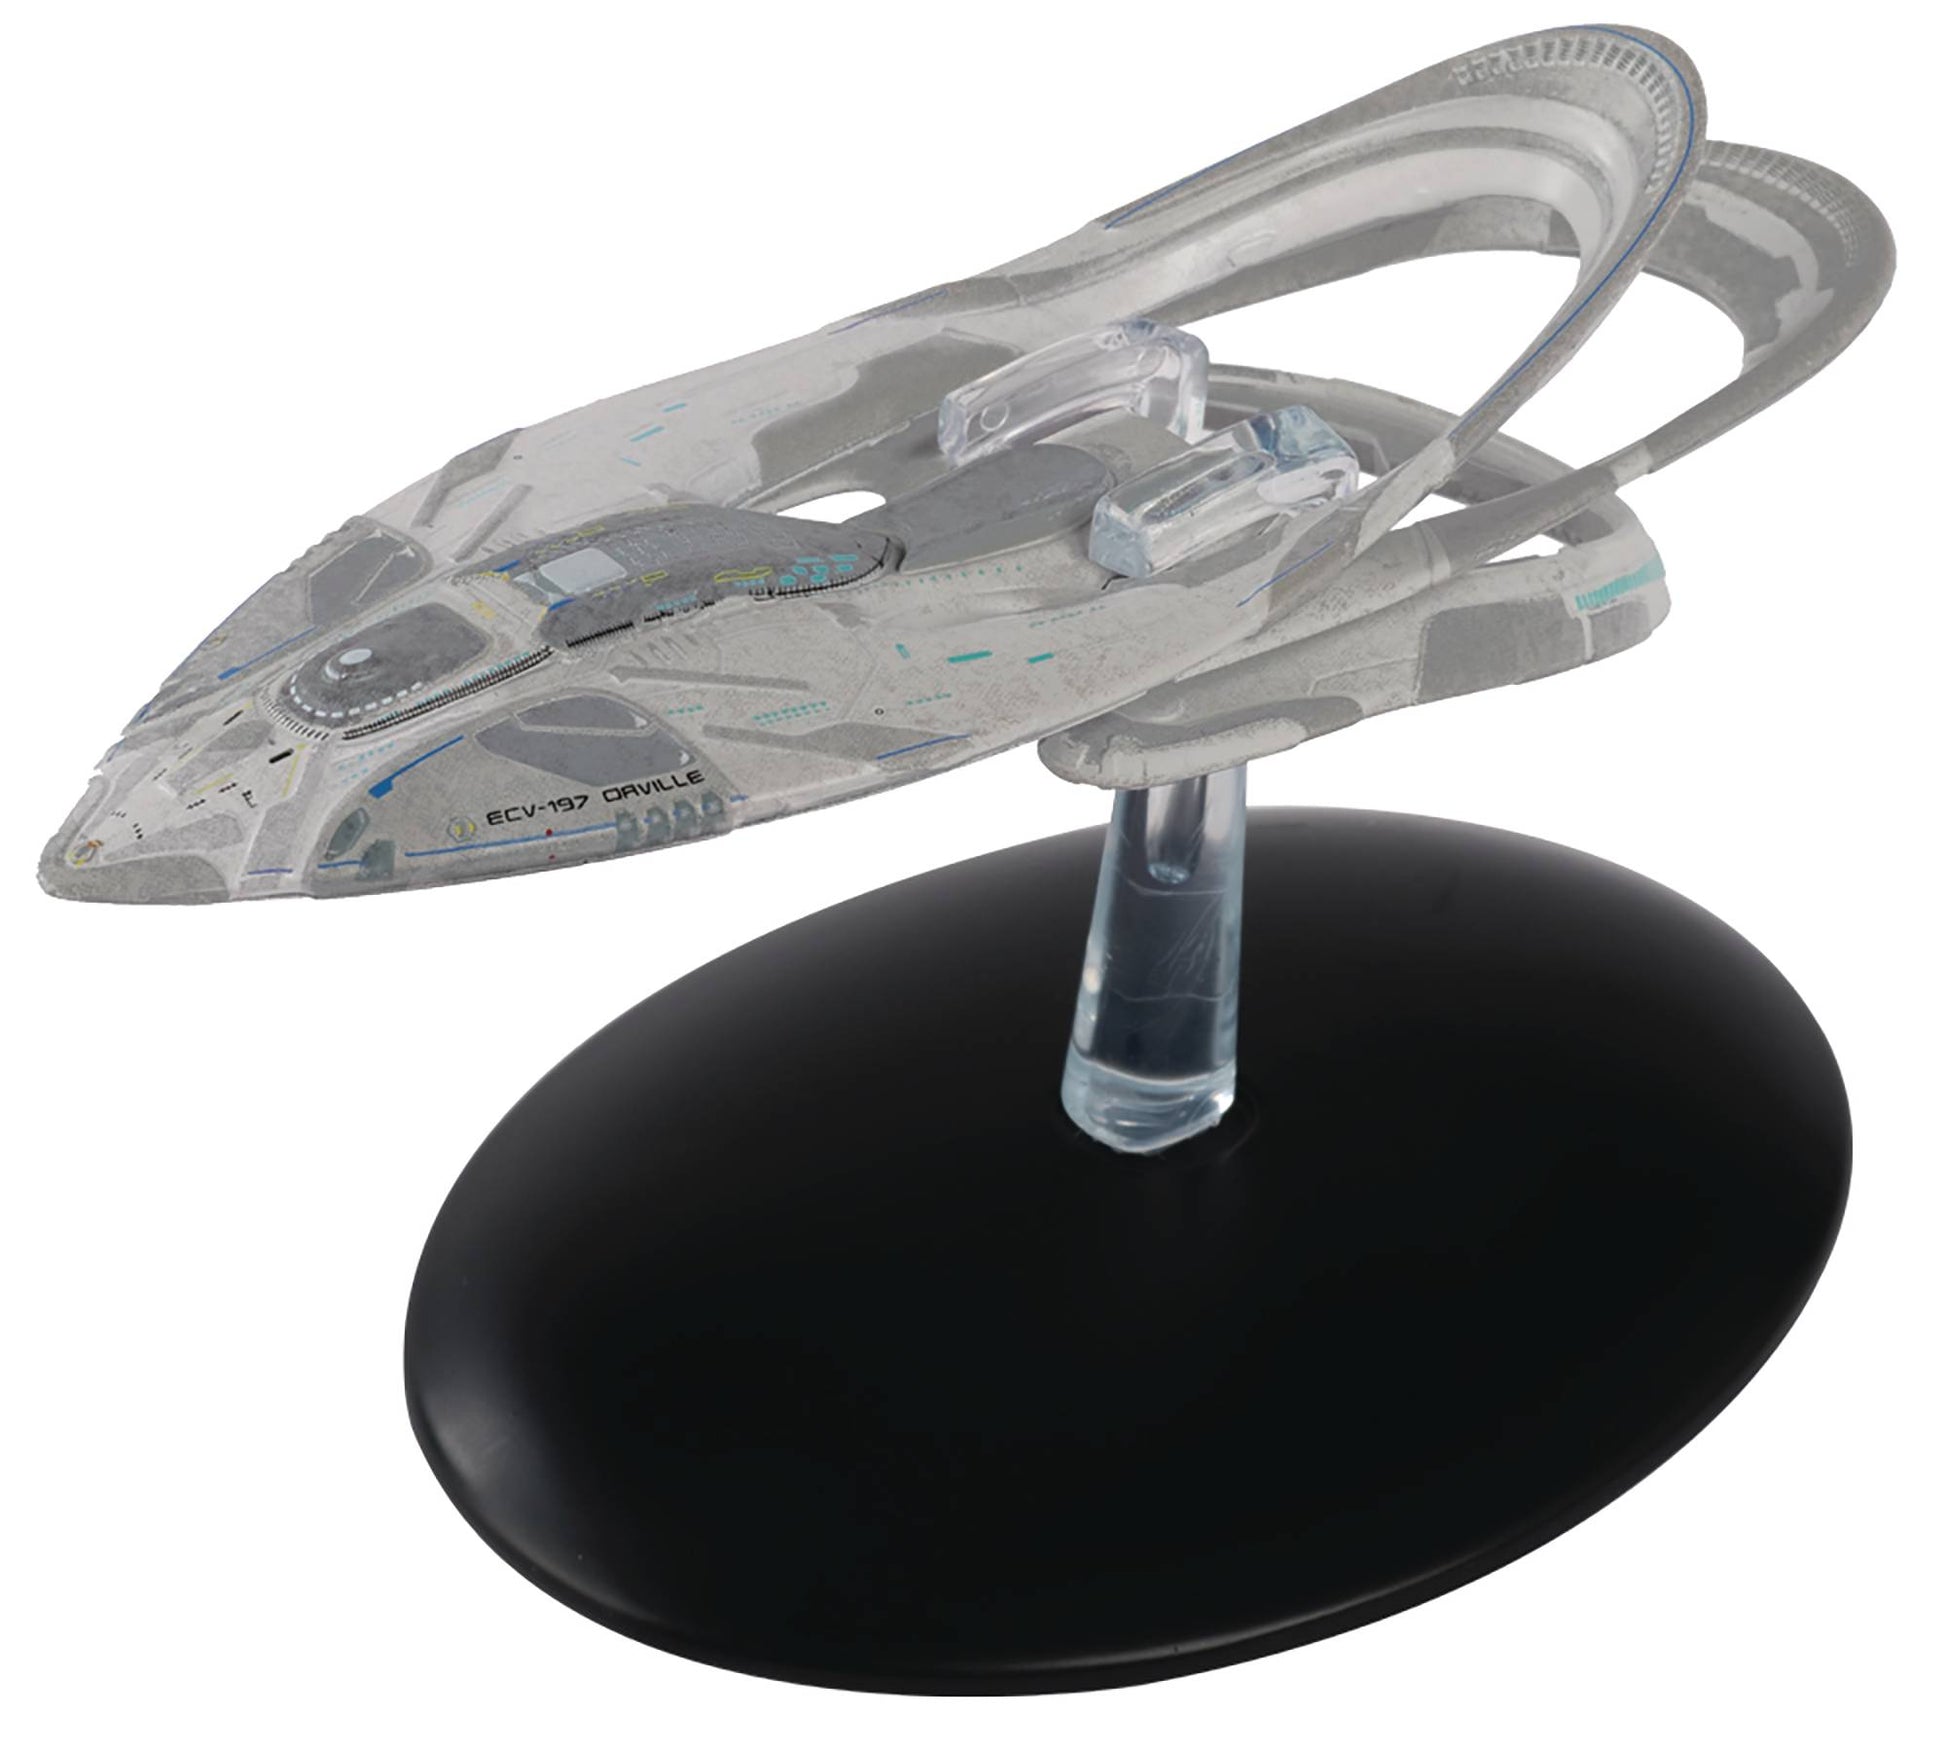 THE ORVILLE OFFICIAL SHIPS COLLECTION #1 USS ORVILE